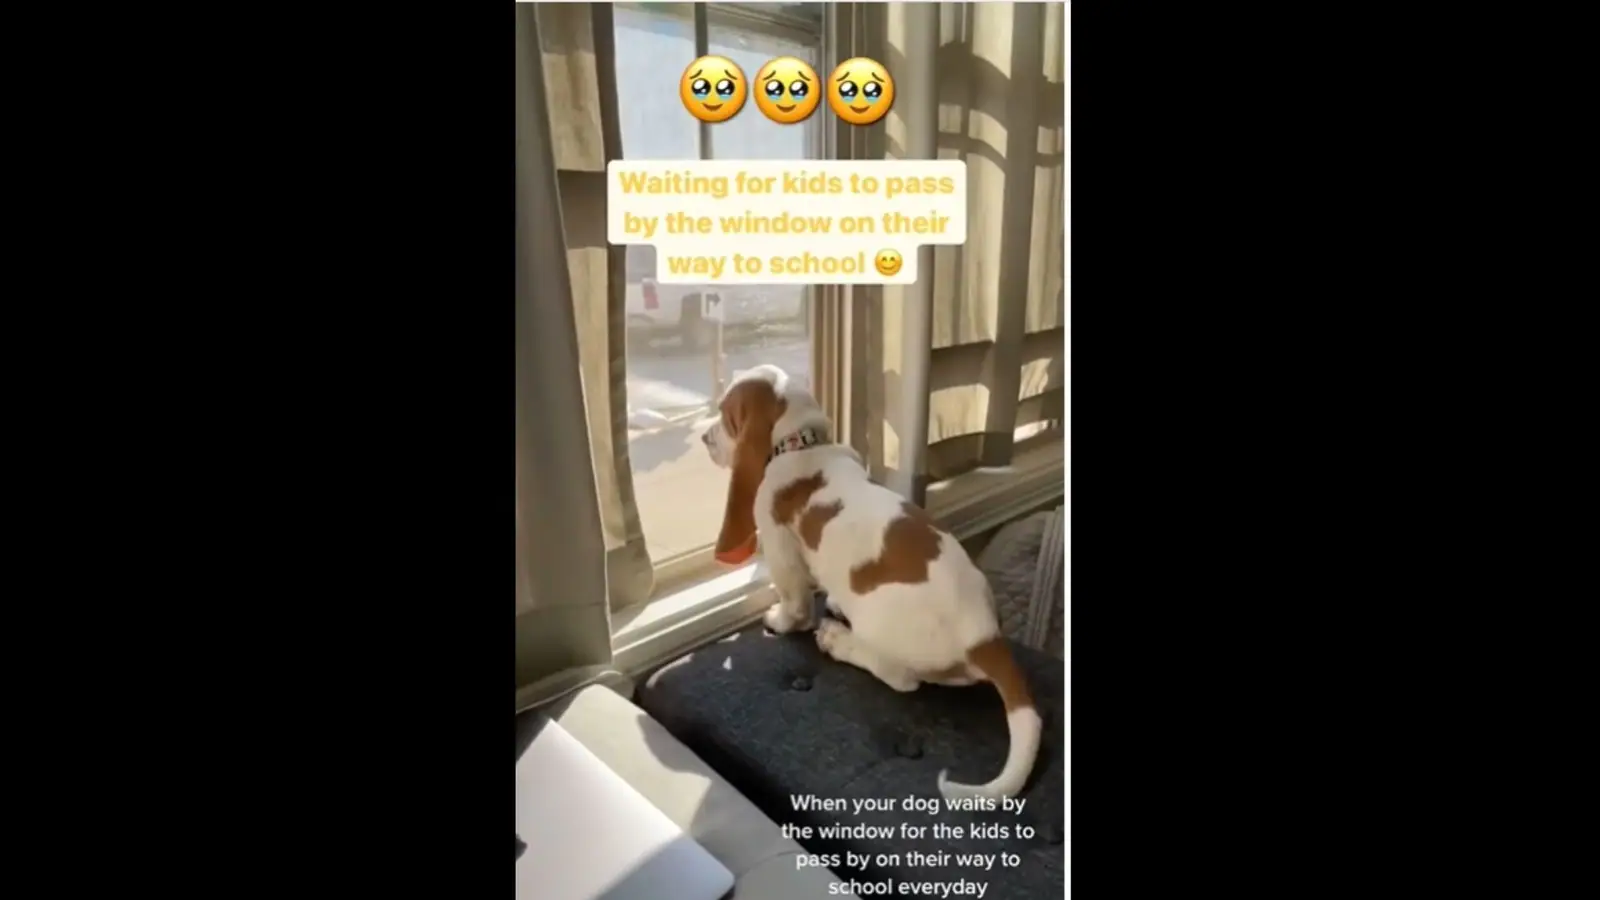 Dog waits by window to meet kids going to school every day. Watch cute video